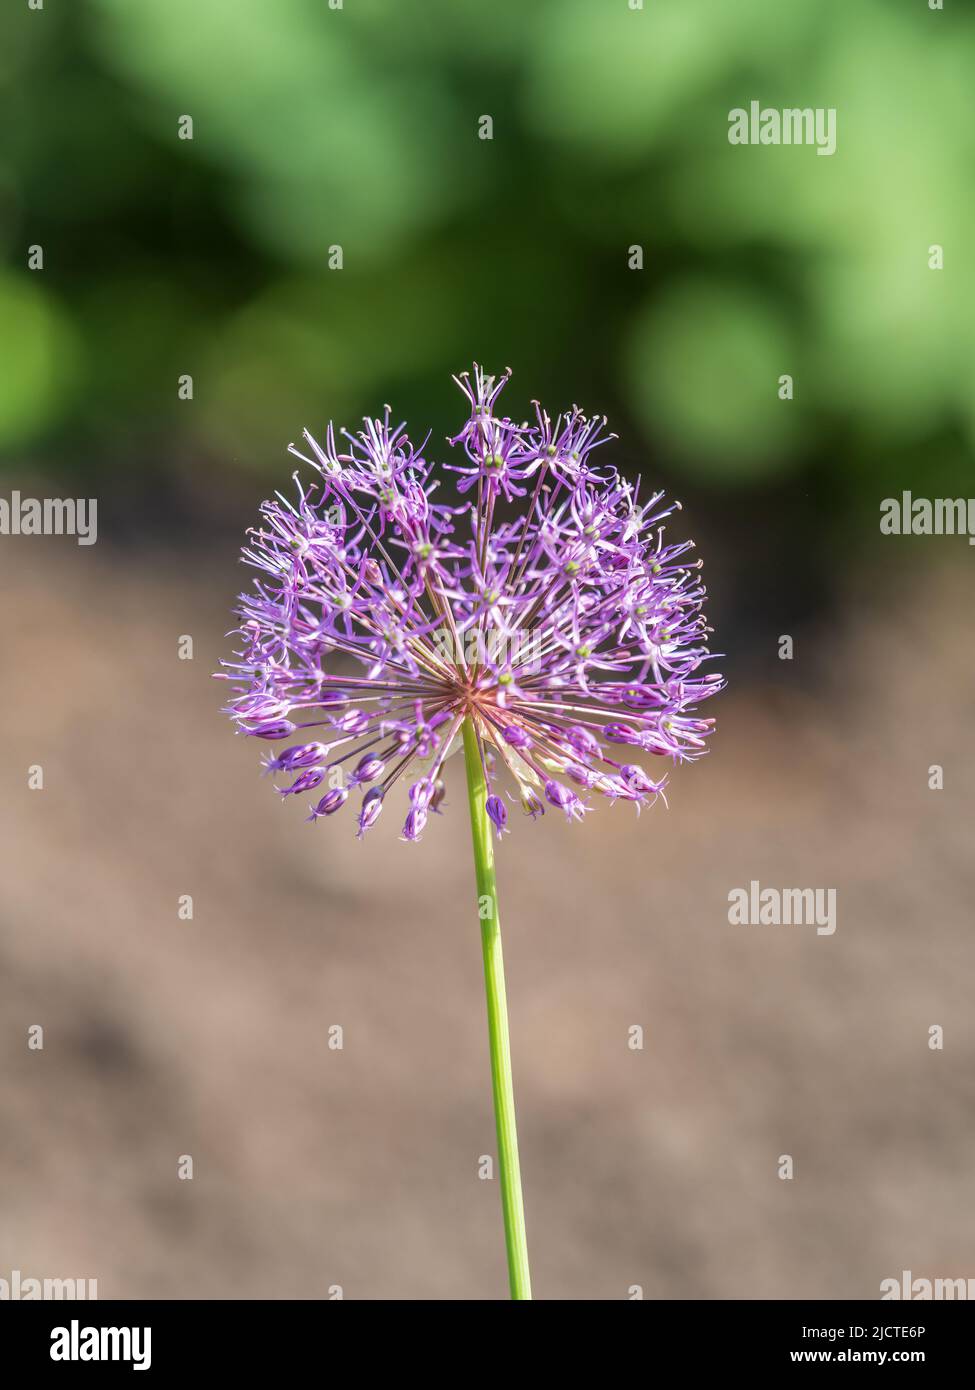 Close-up of the inflorescence of the Rosenbachian onion, Allium rosenbachianum, blooming in the garden in spring or summer. Stock Photo